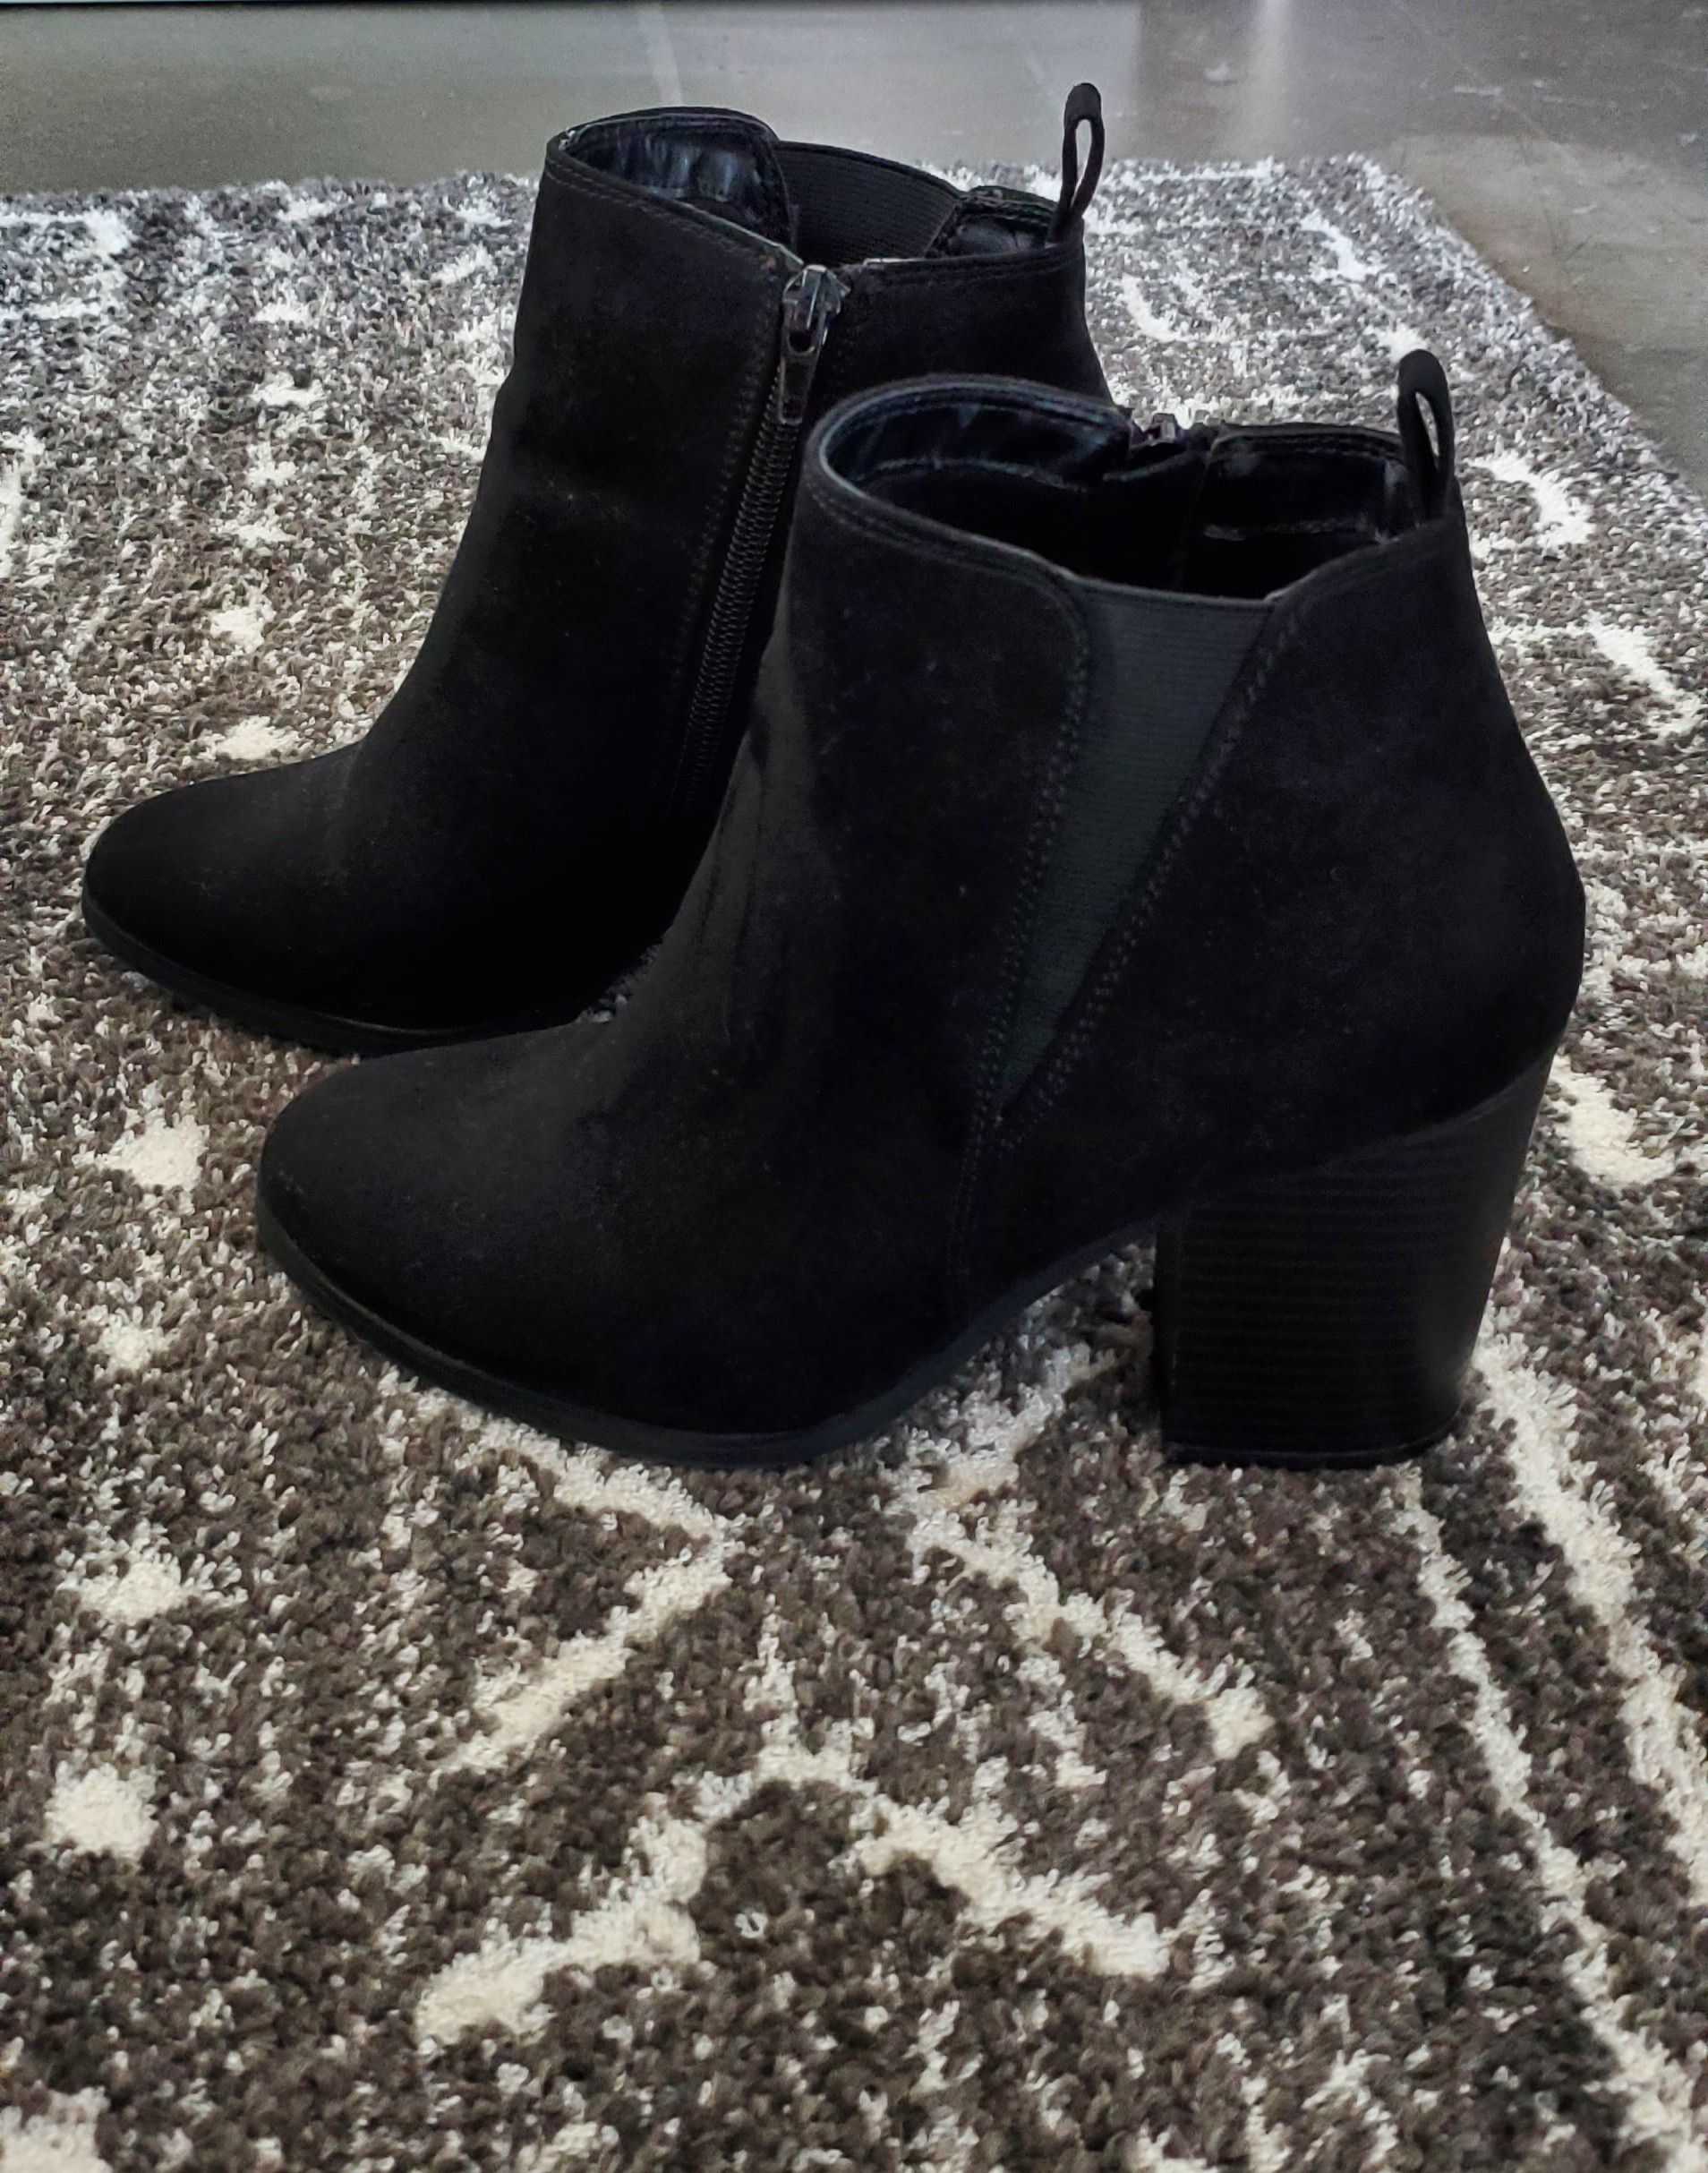 EXPRESS black boots (size 6) - Reduced Price